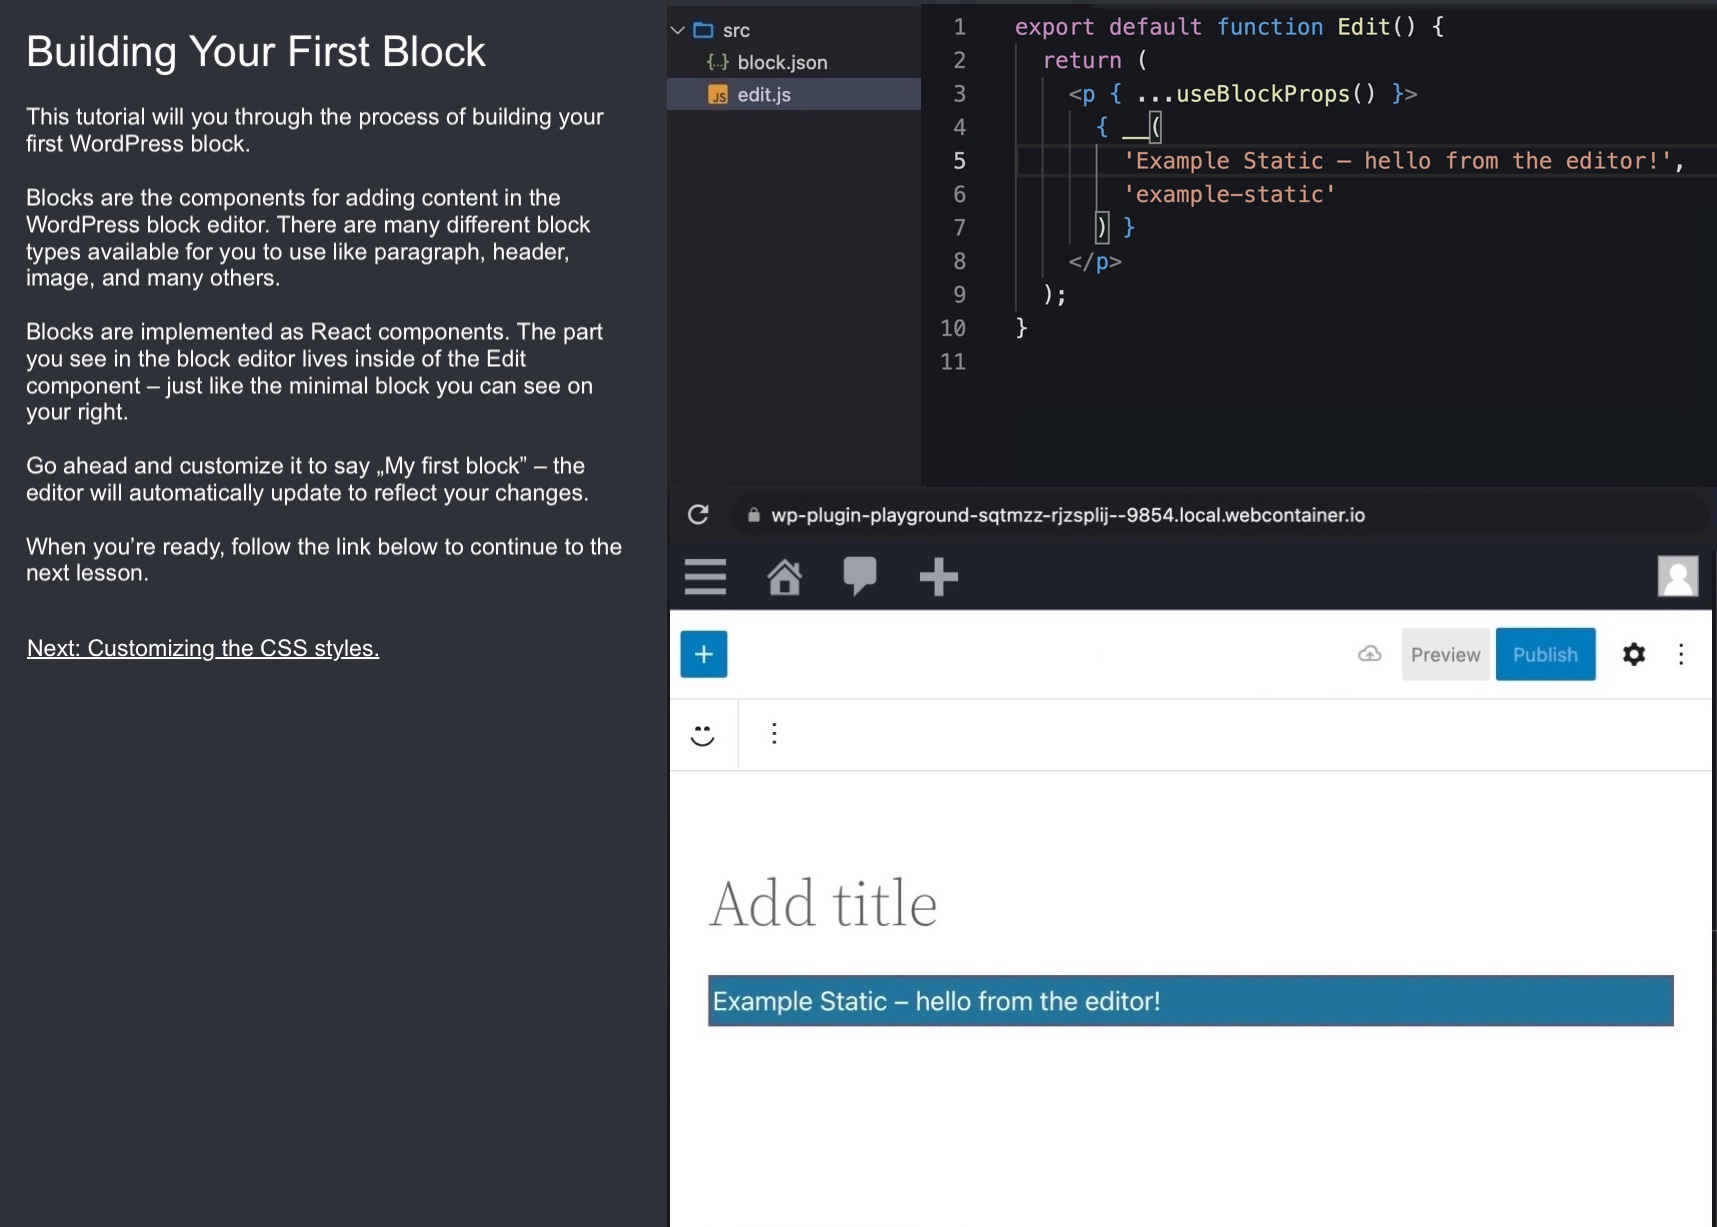 Concept for a guided code editor showing a “Build your first block” button.